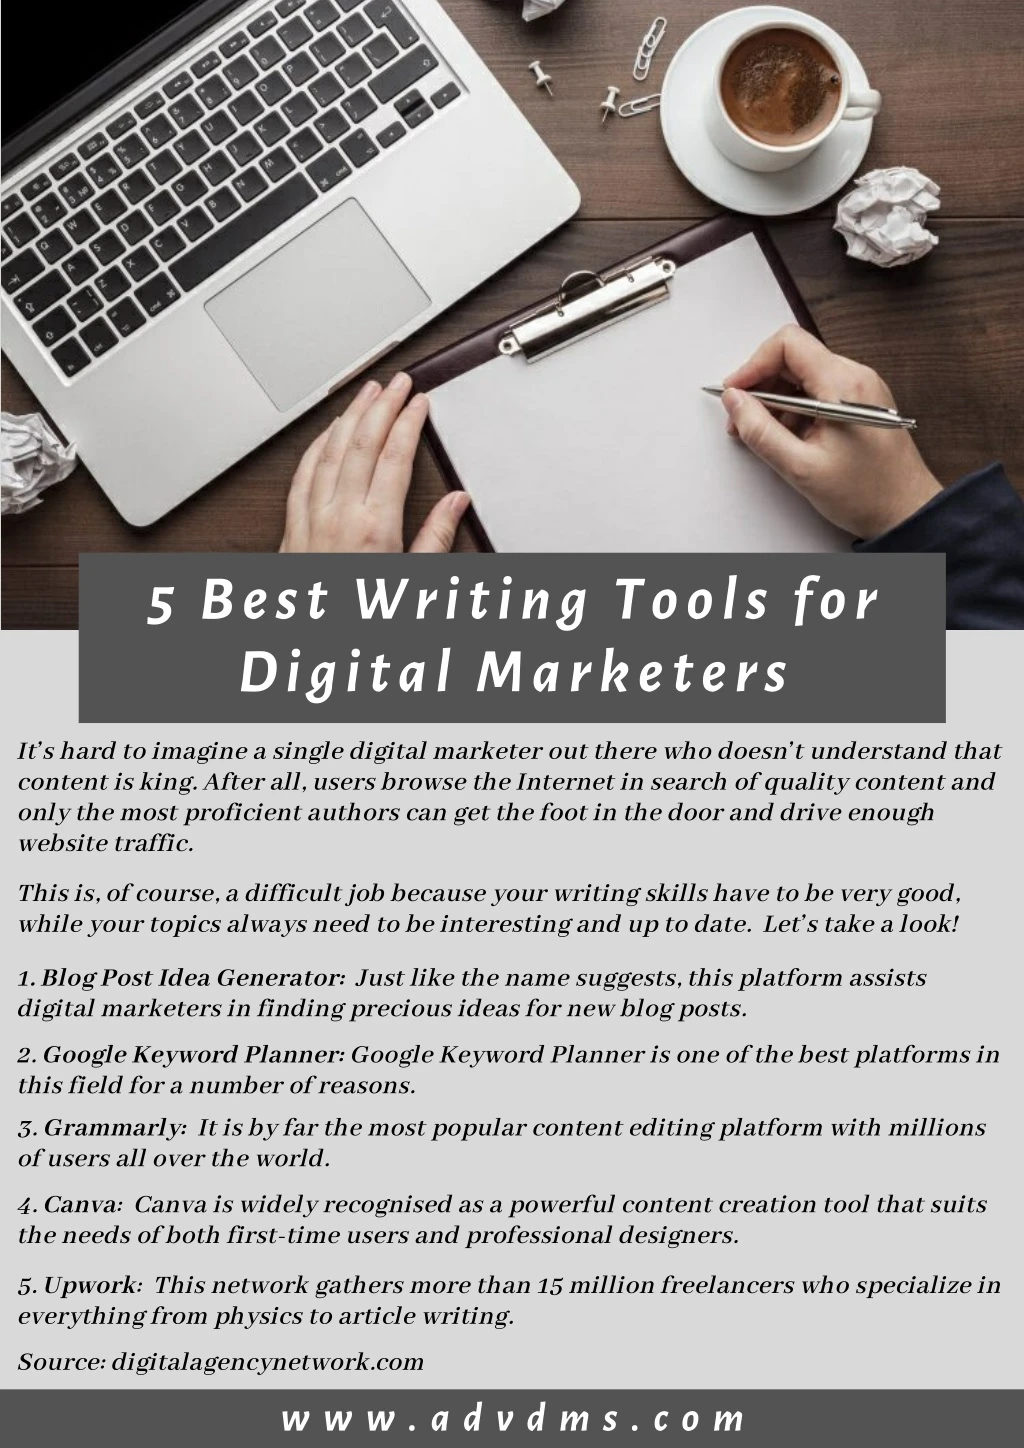 5 best writing tools for digital marketers